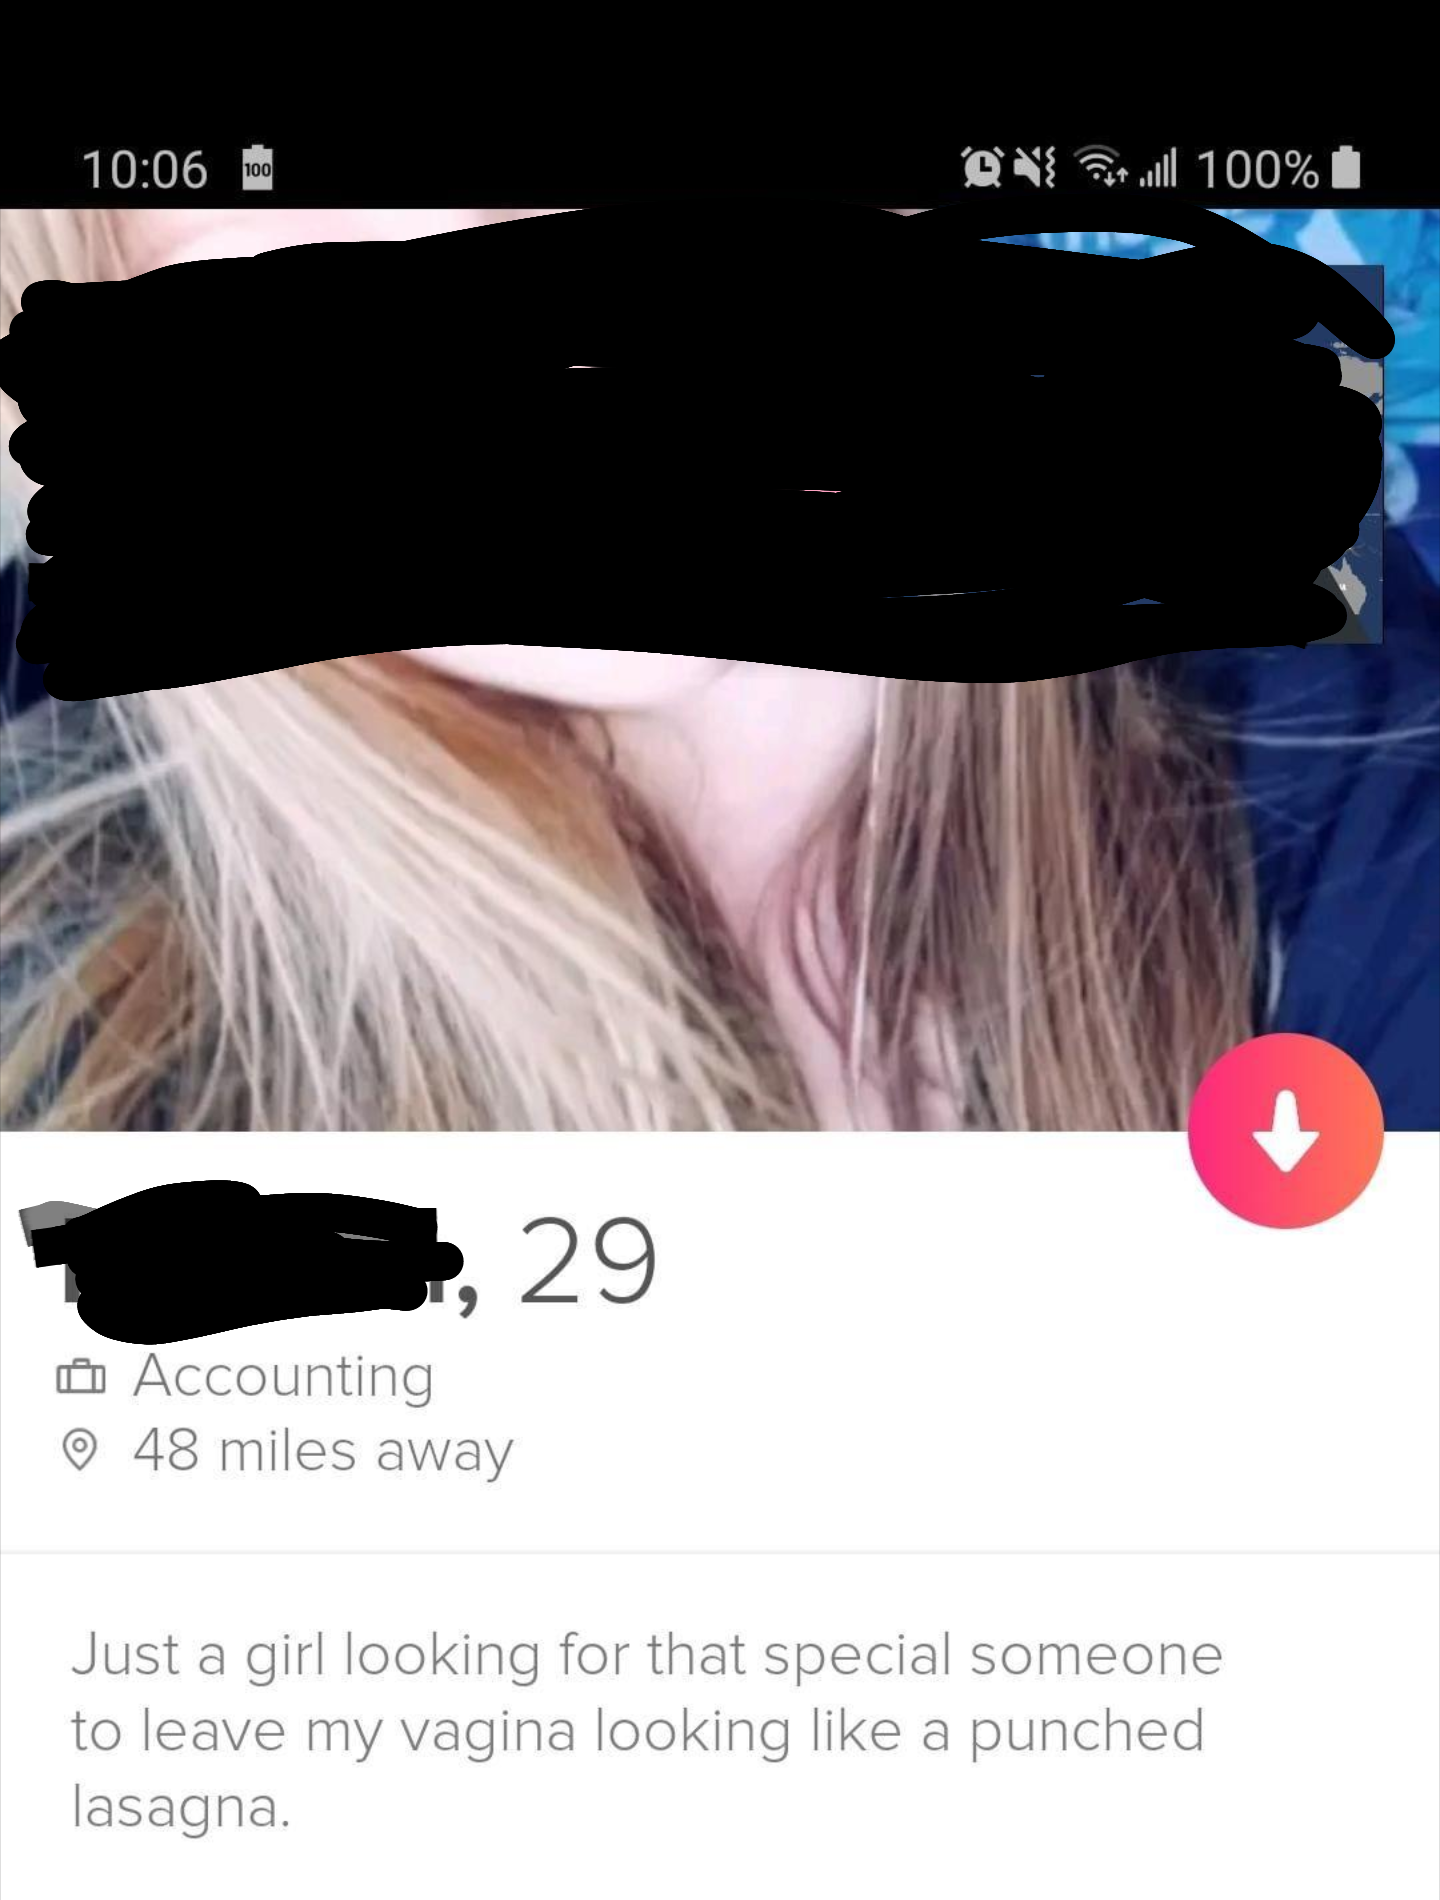 Just a girl looking for that special someone to leave my vagina looking a punched lasagna